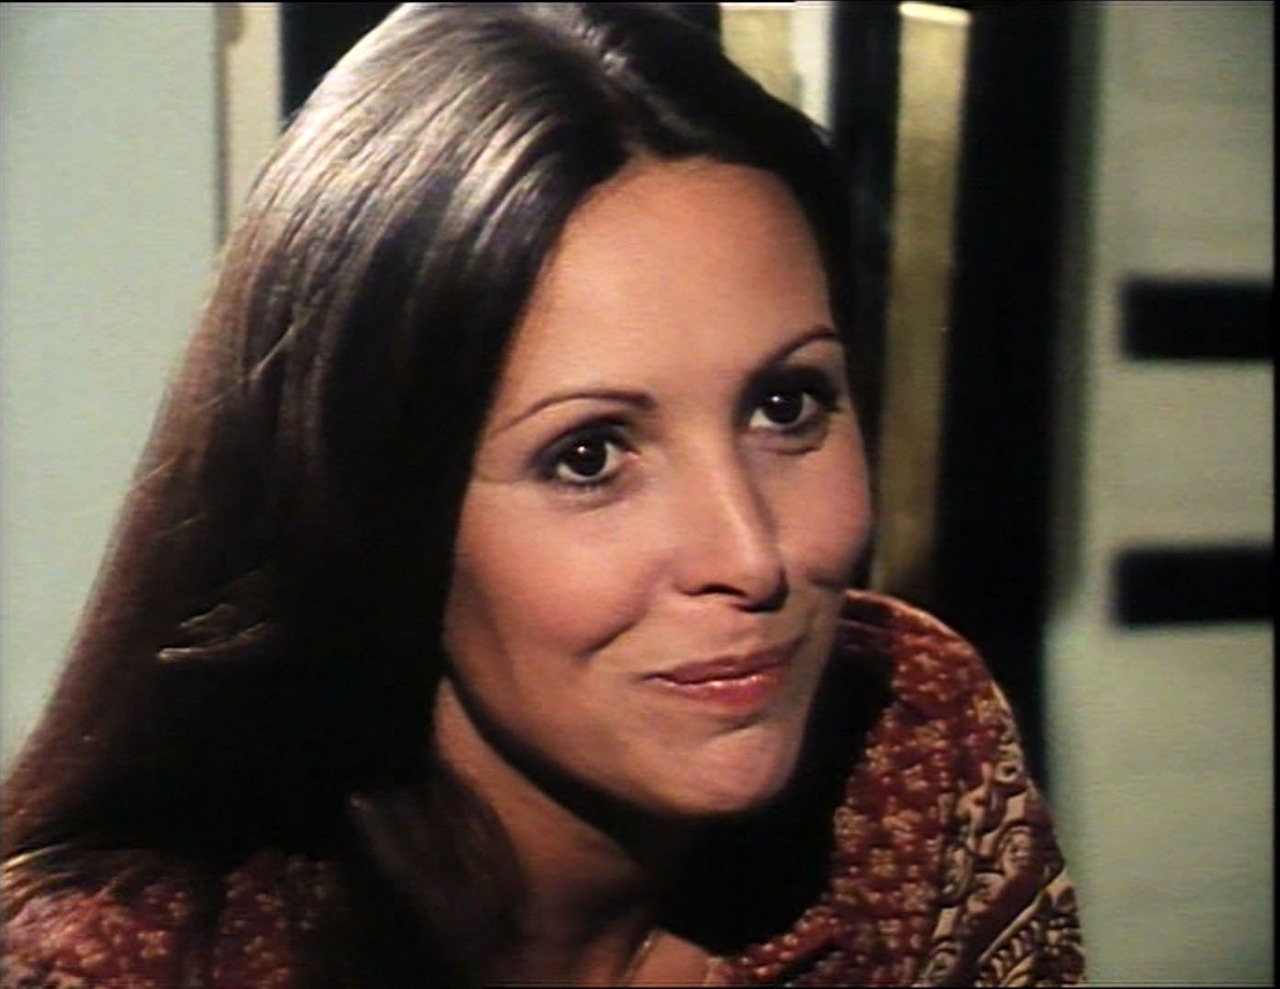 All About Eve — Diane Keen in the Professionals episode 